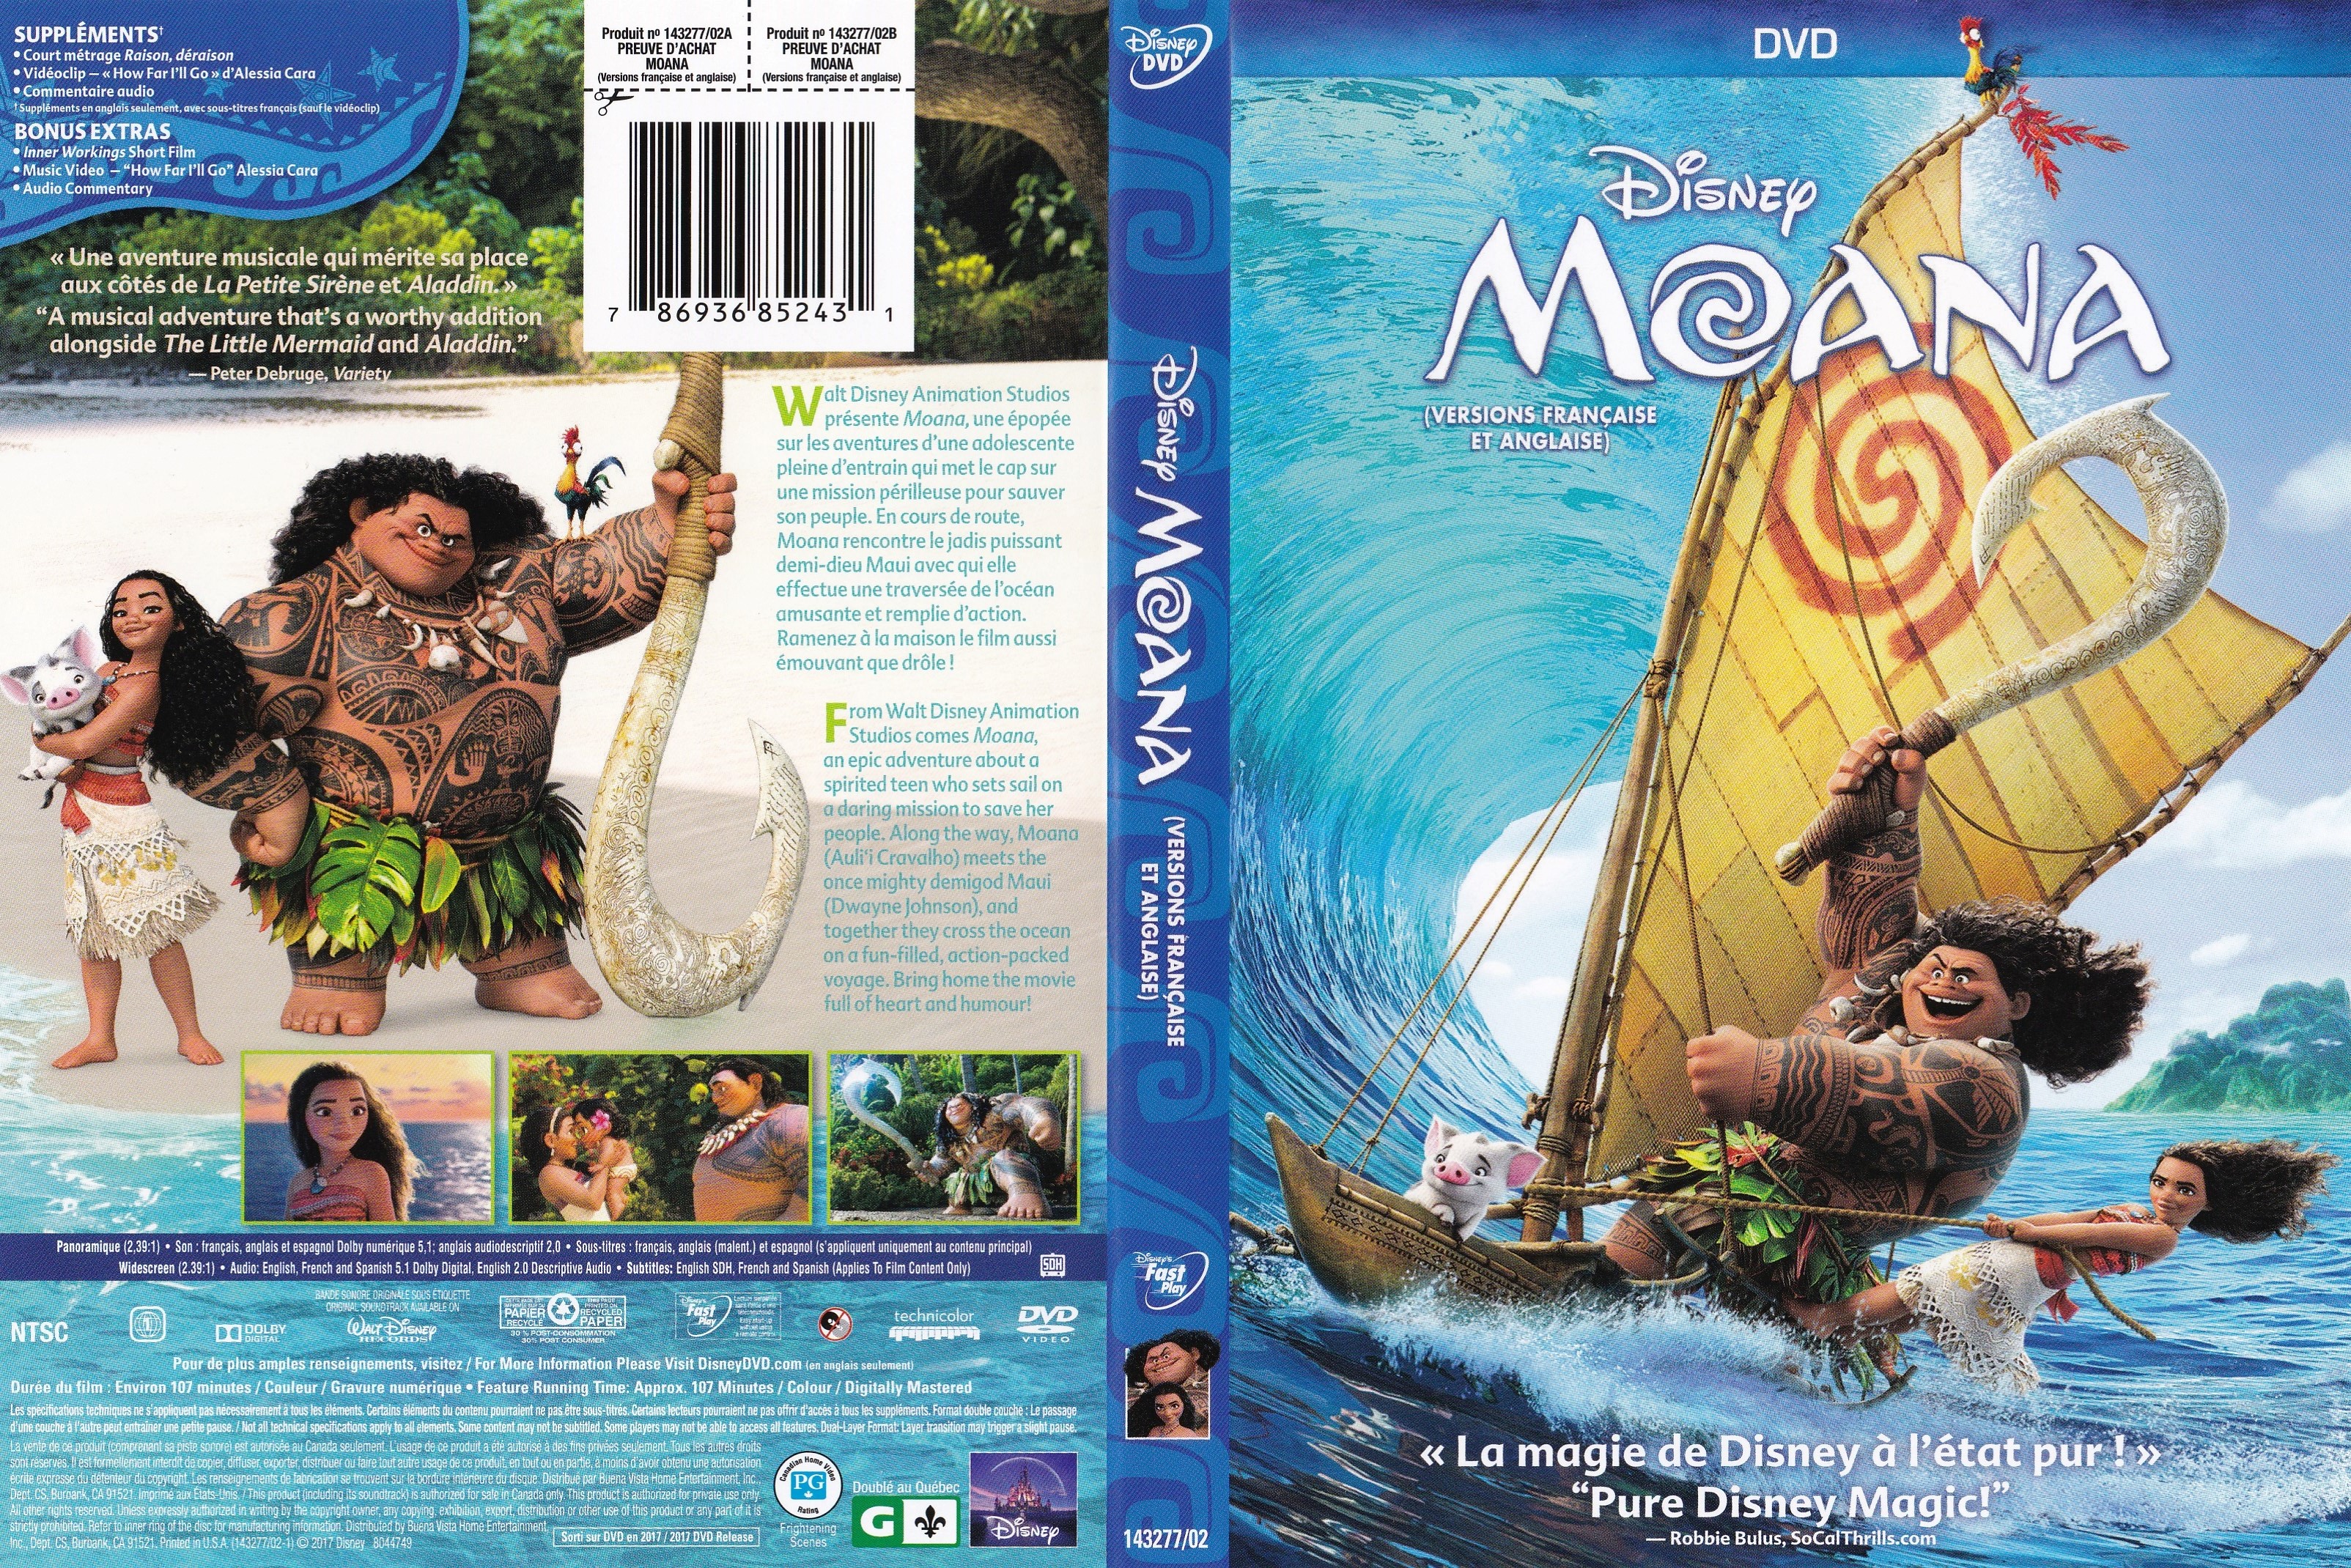 Jaquette DVD Moana (canadienne)